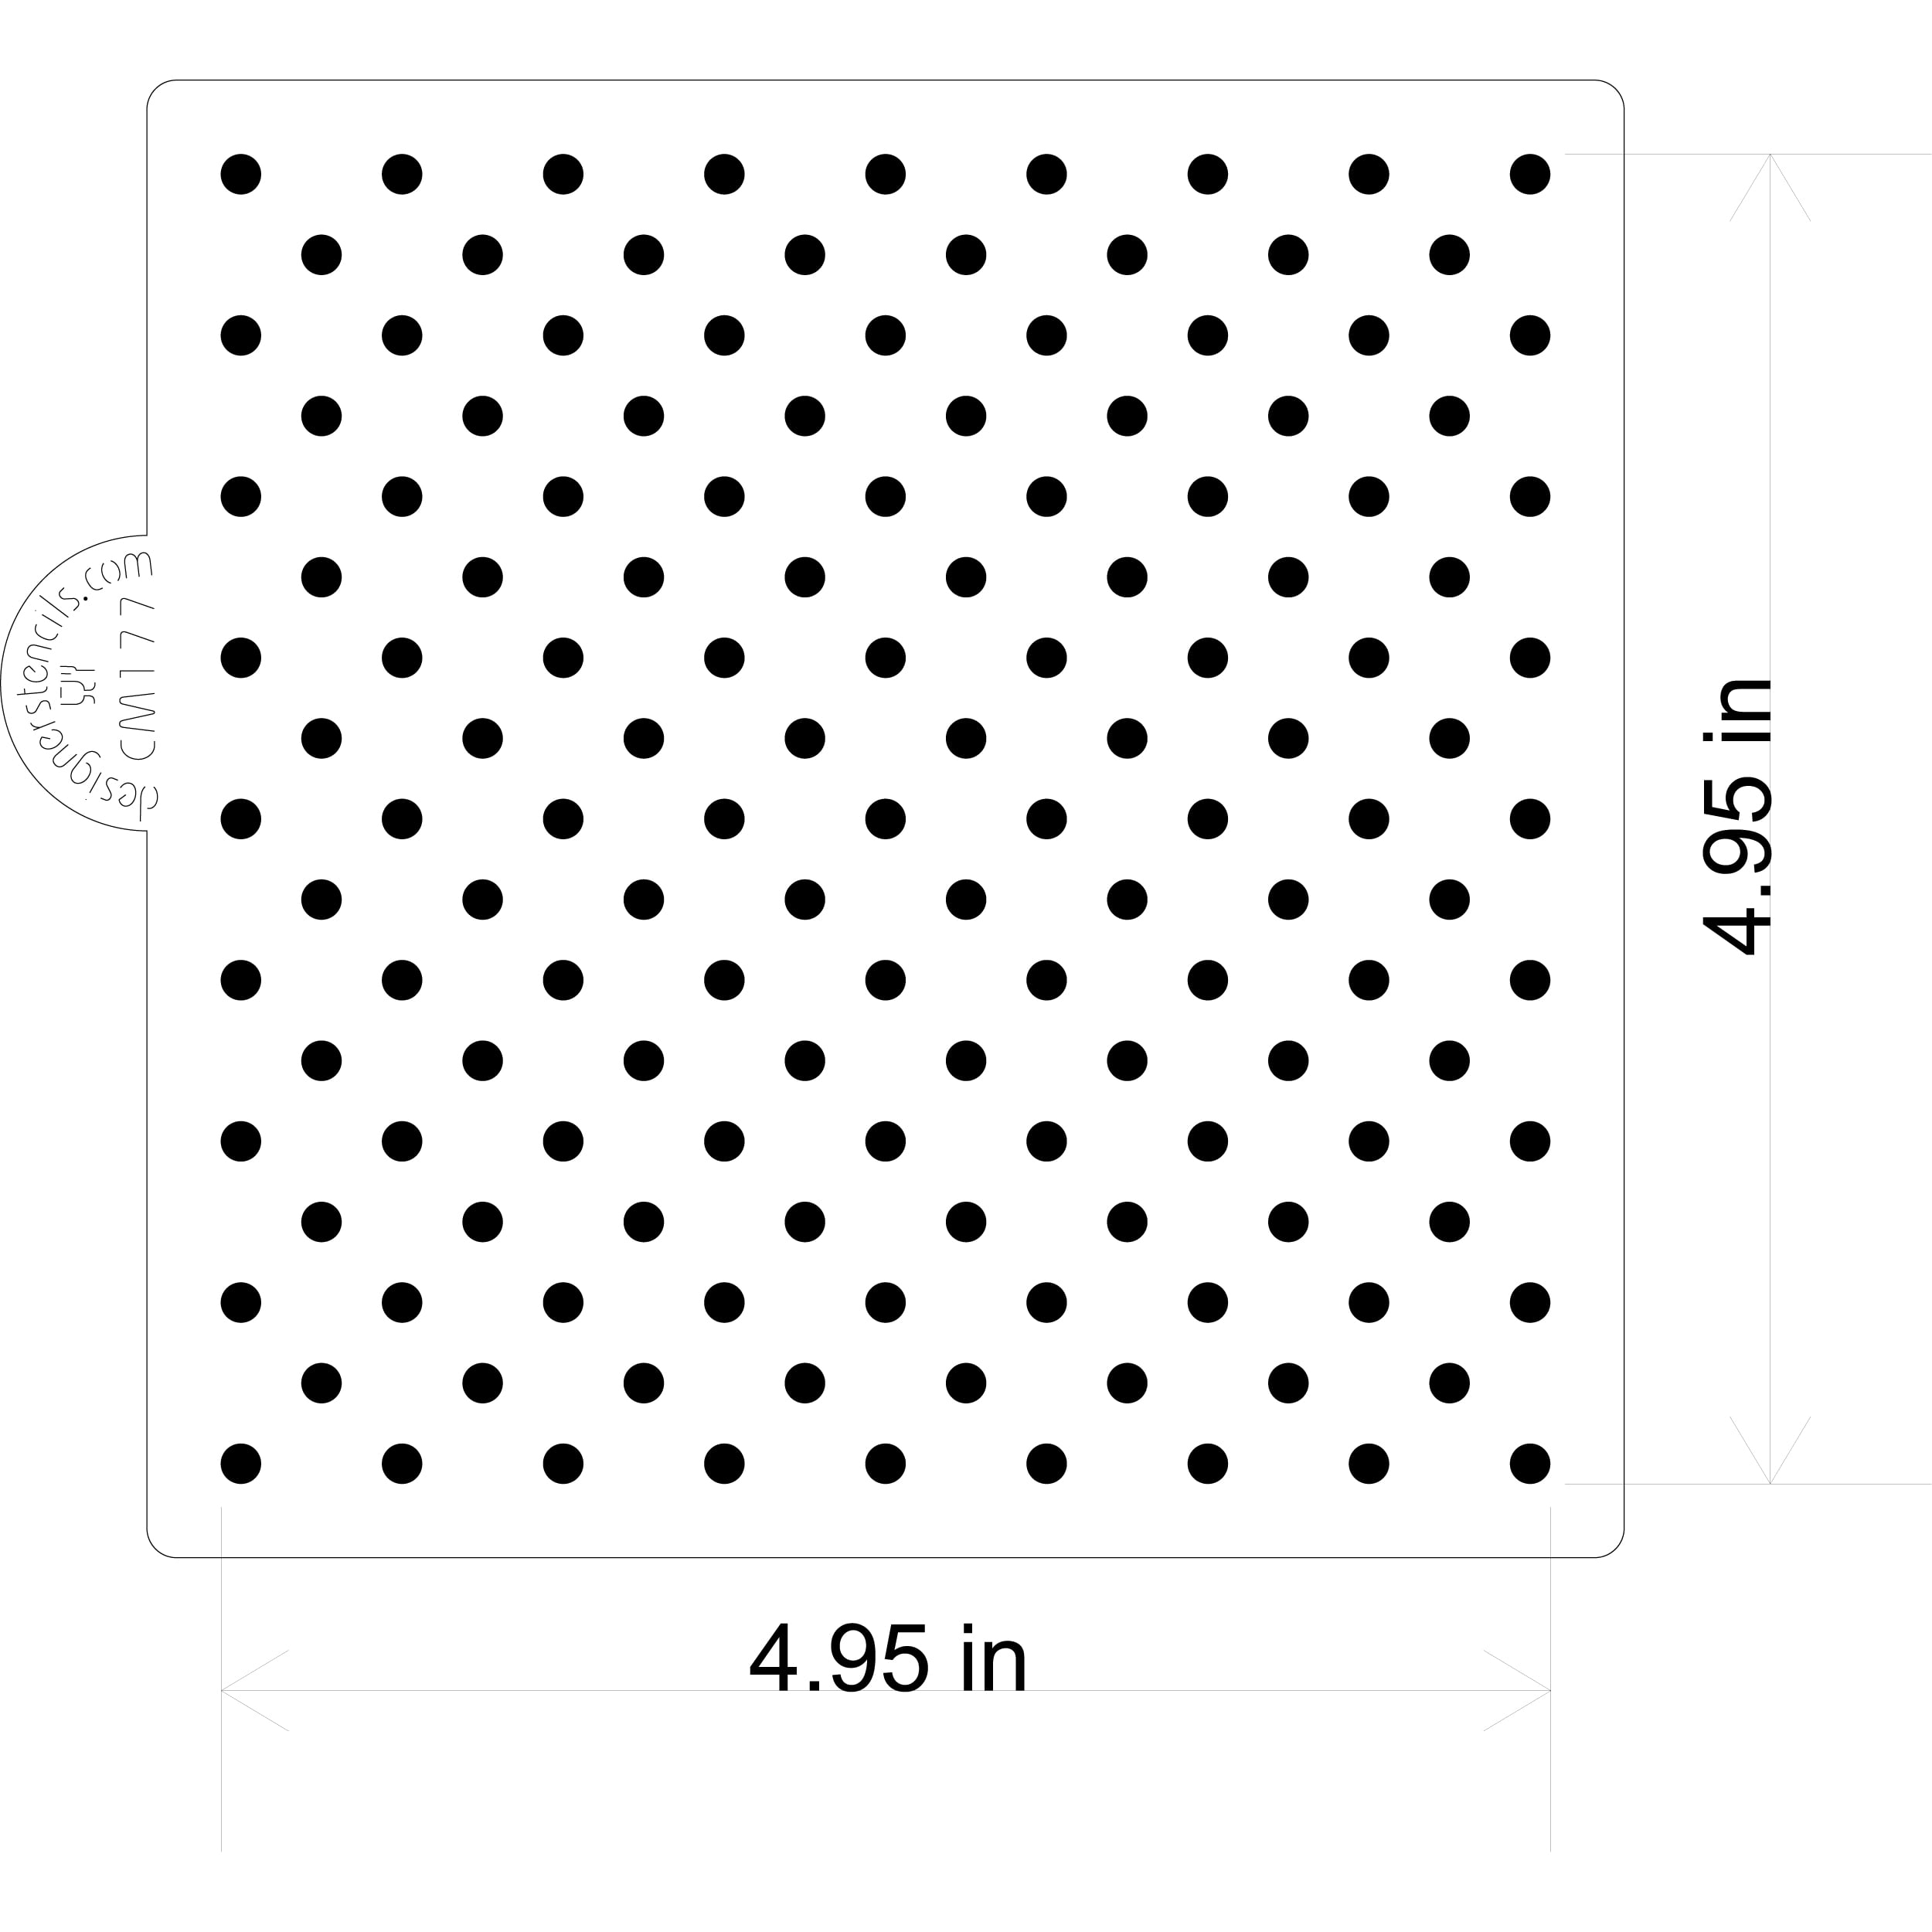 Circle Templates Geometric Drawing Template Measuring Ruler Stencils  Drawing Set Scale Drafting Tools, Plastic Digital Painting Stencils for  School, Office, Building Formwork, Drawings 